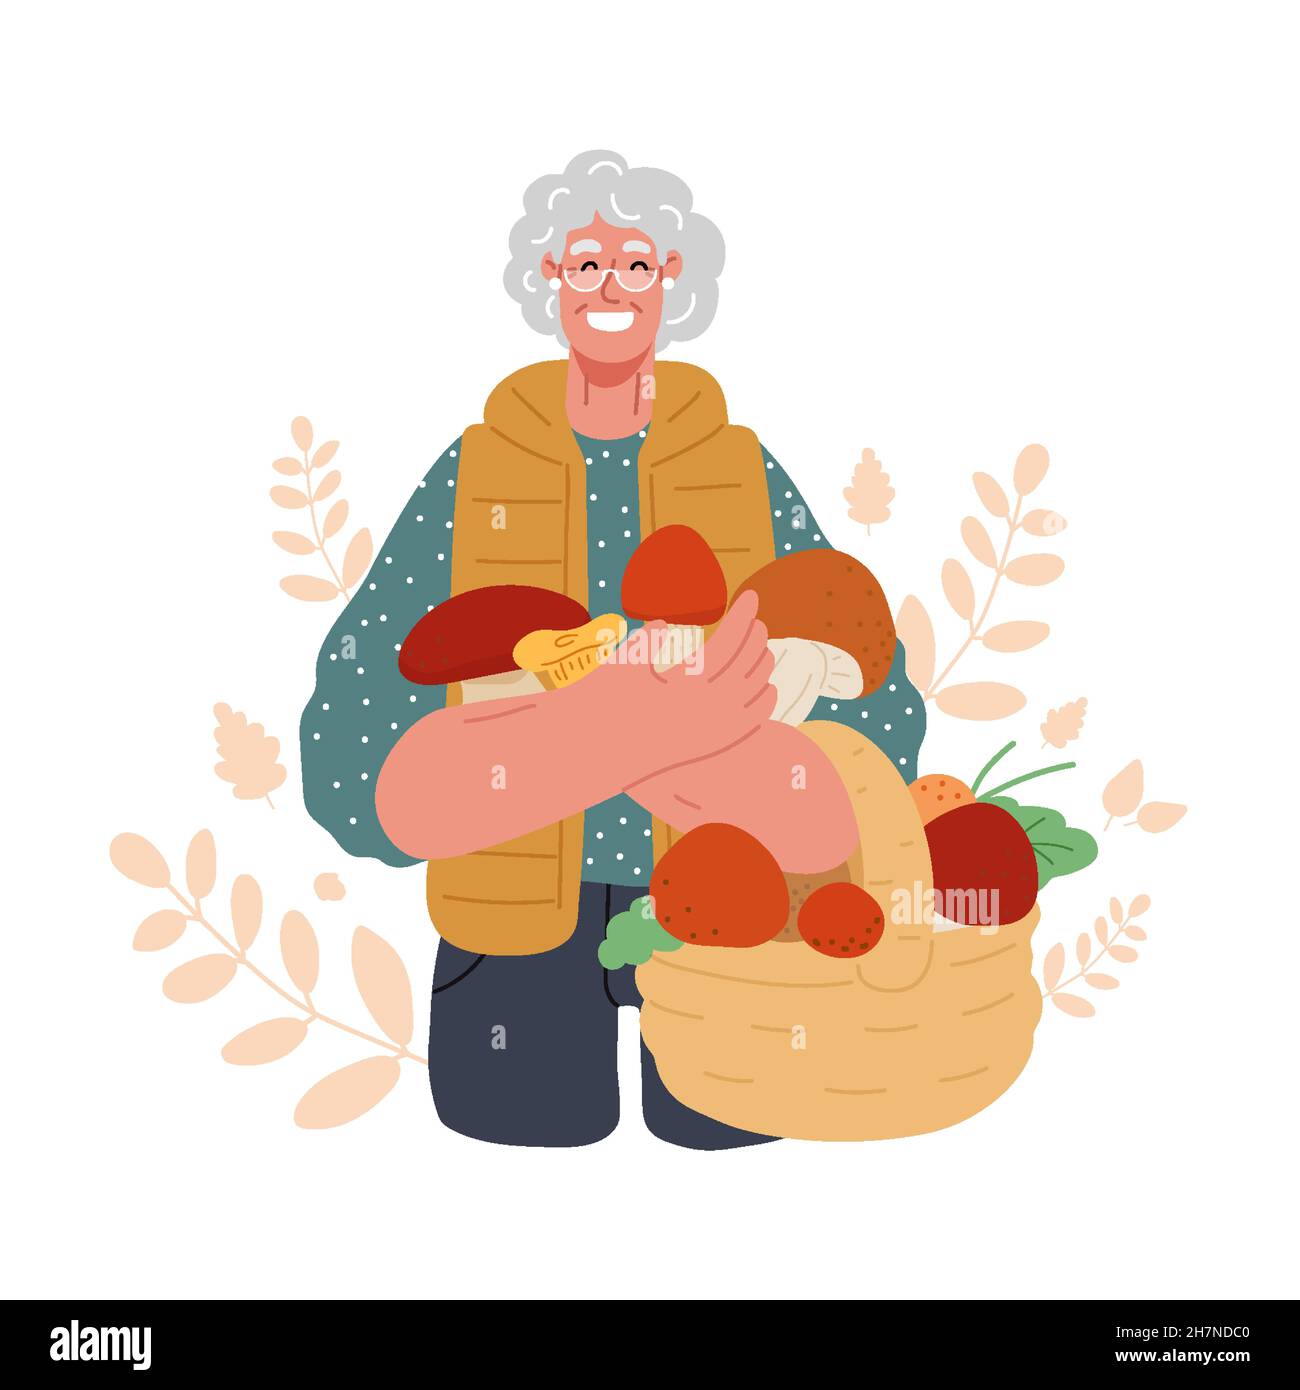 Mushrooms picking,hunting concept,finding fungus in the forest,active seniors.A old woman stands with a basket, holding mushrooms harvested in the fal Stock Vector